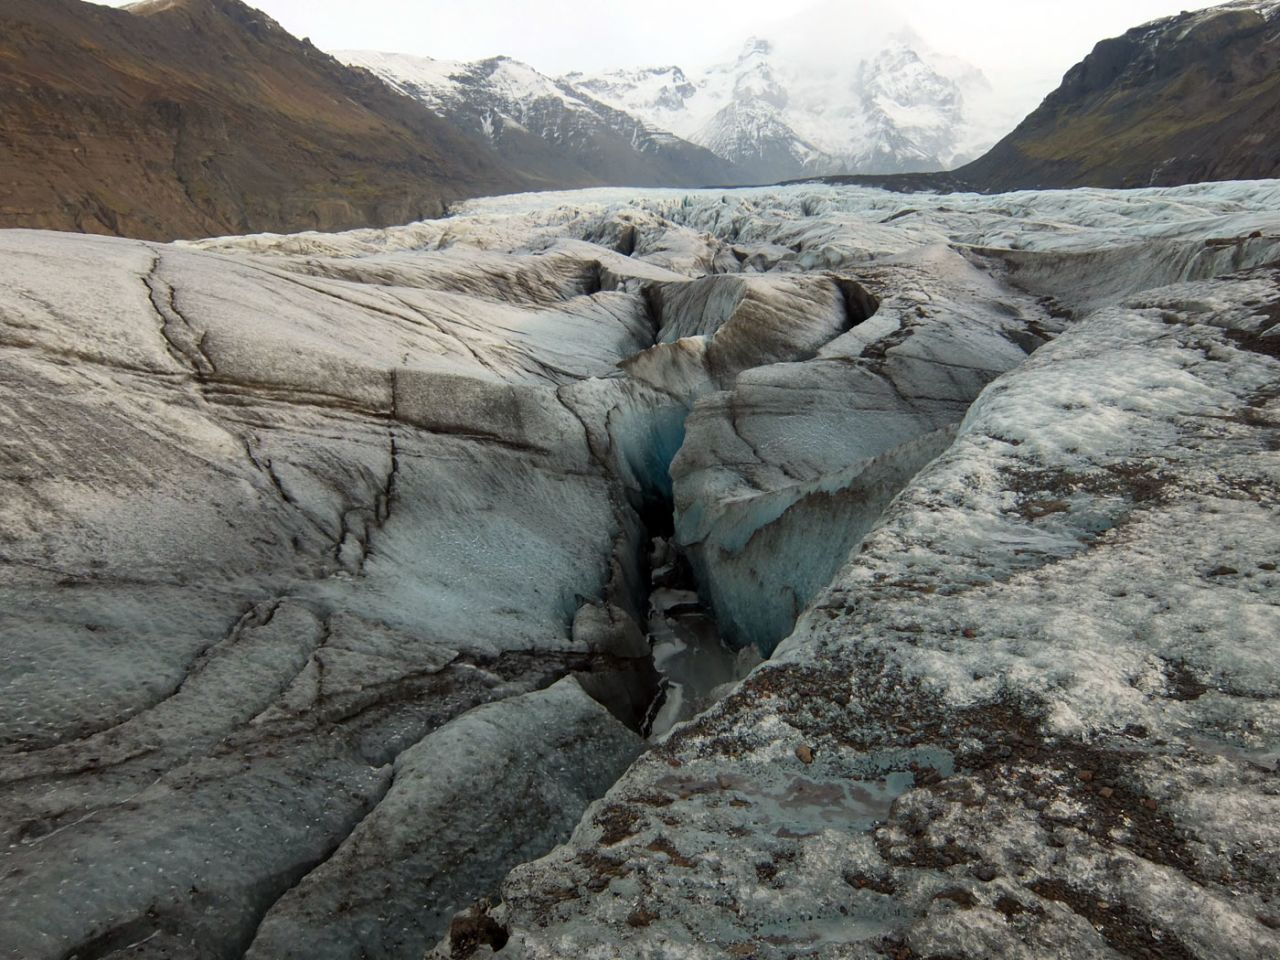 The glacier appears marbled where crevasses have opened then closed again as the ice moves down the mountain. The dirt is morraine -- debris torn up by the glacier.